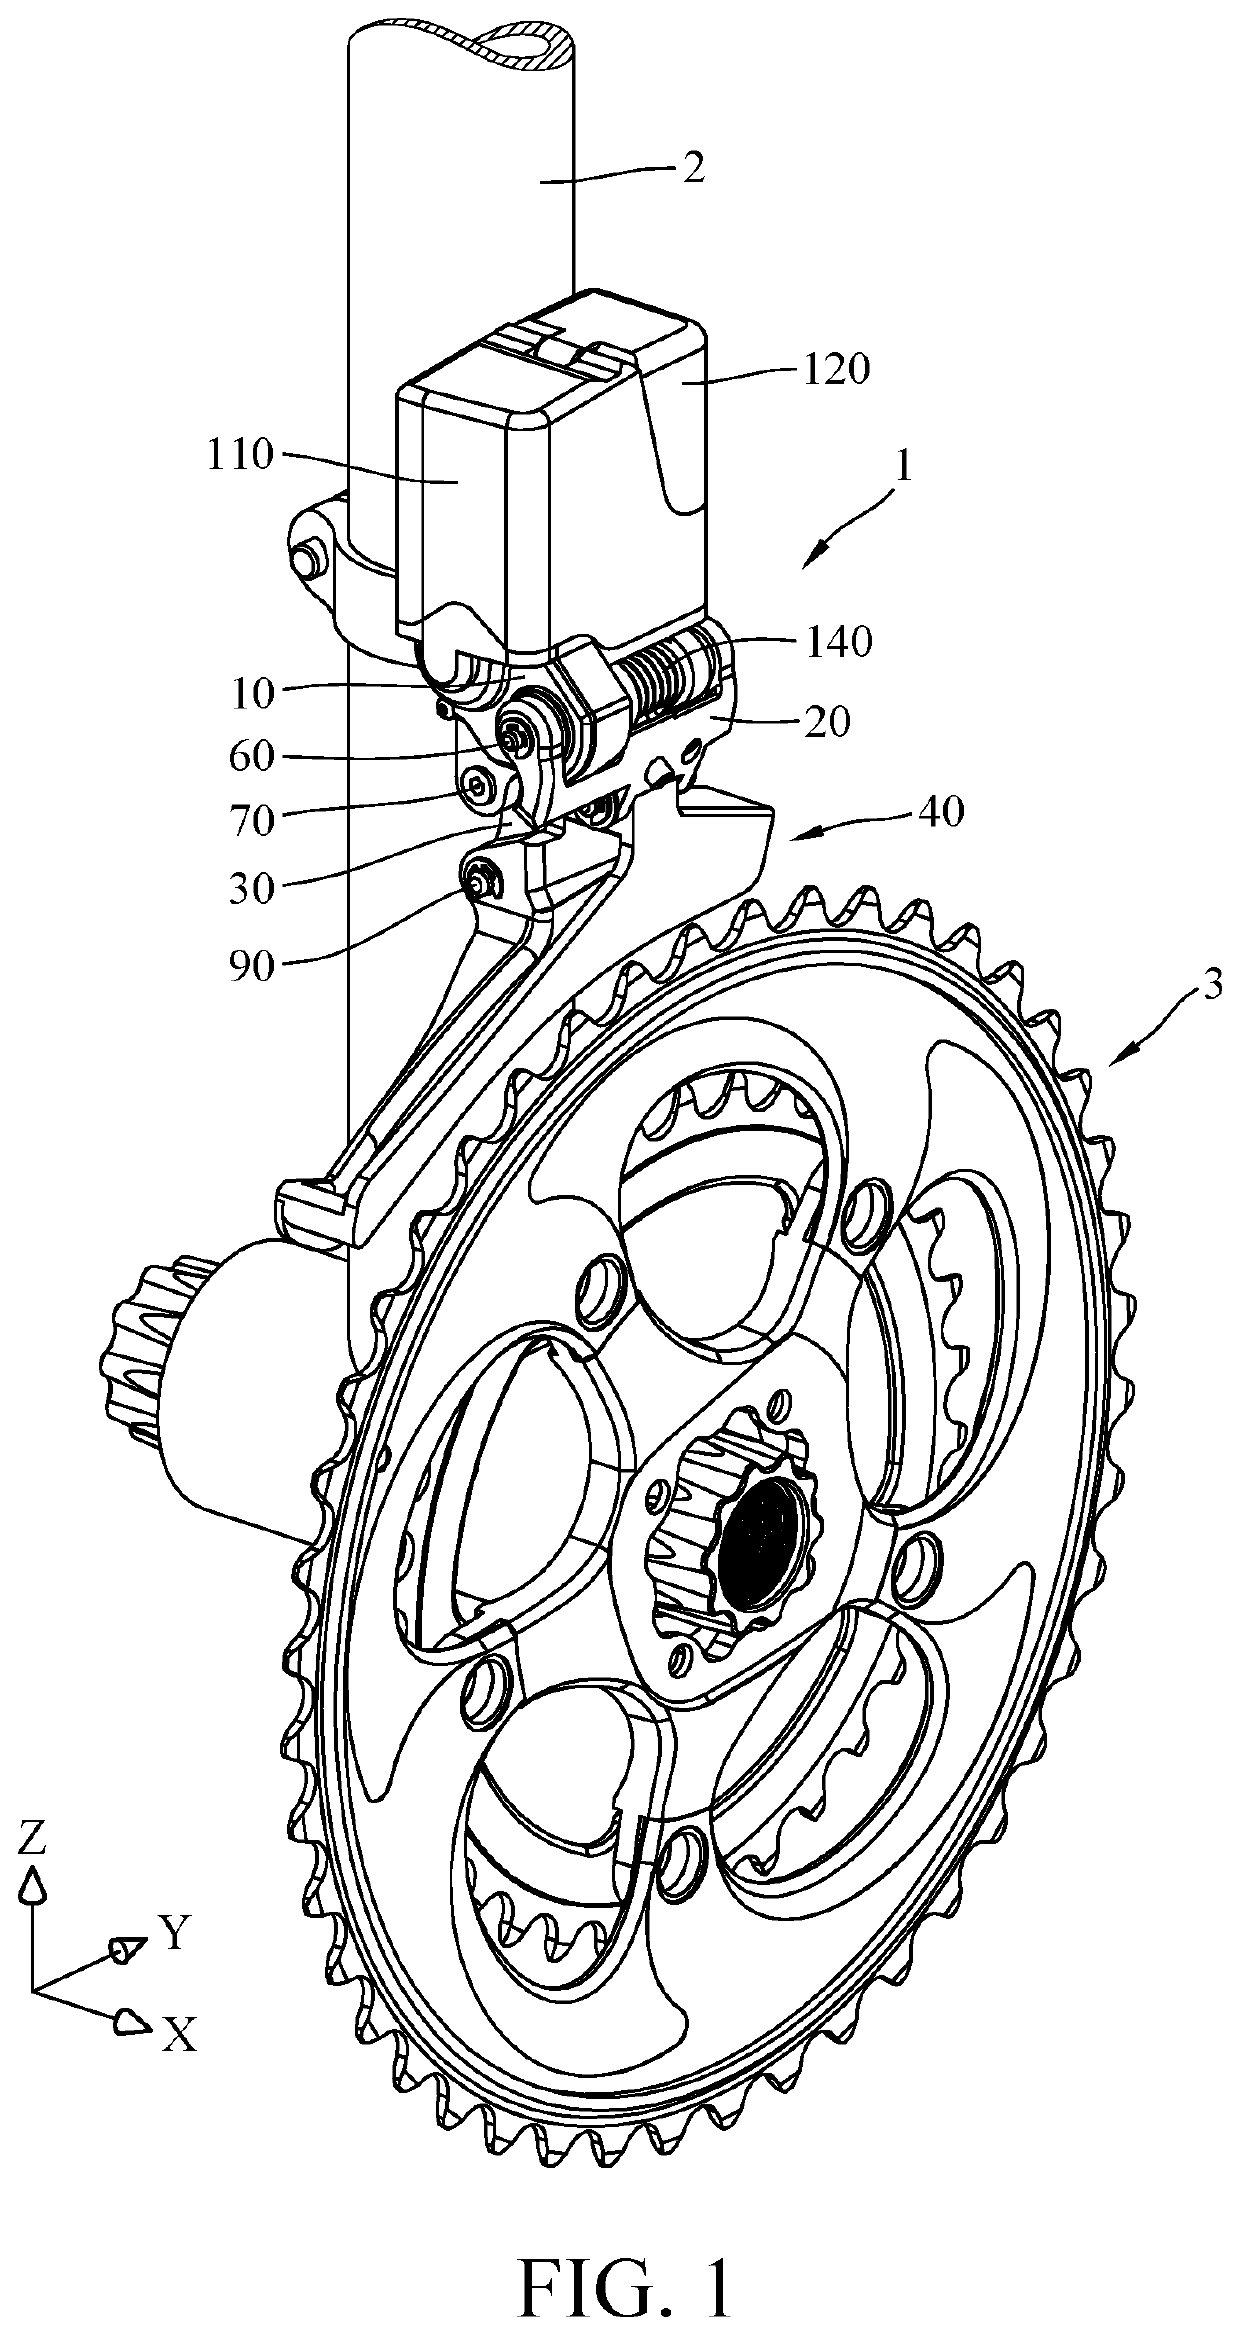 Bicycle front derailleur and bicycle rear derailleur